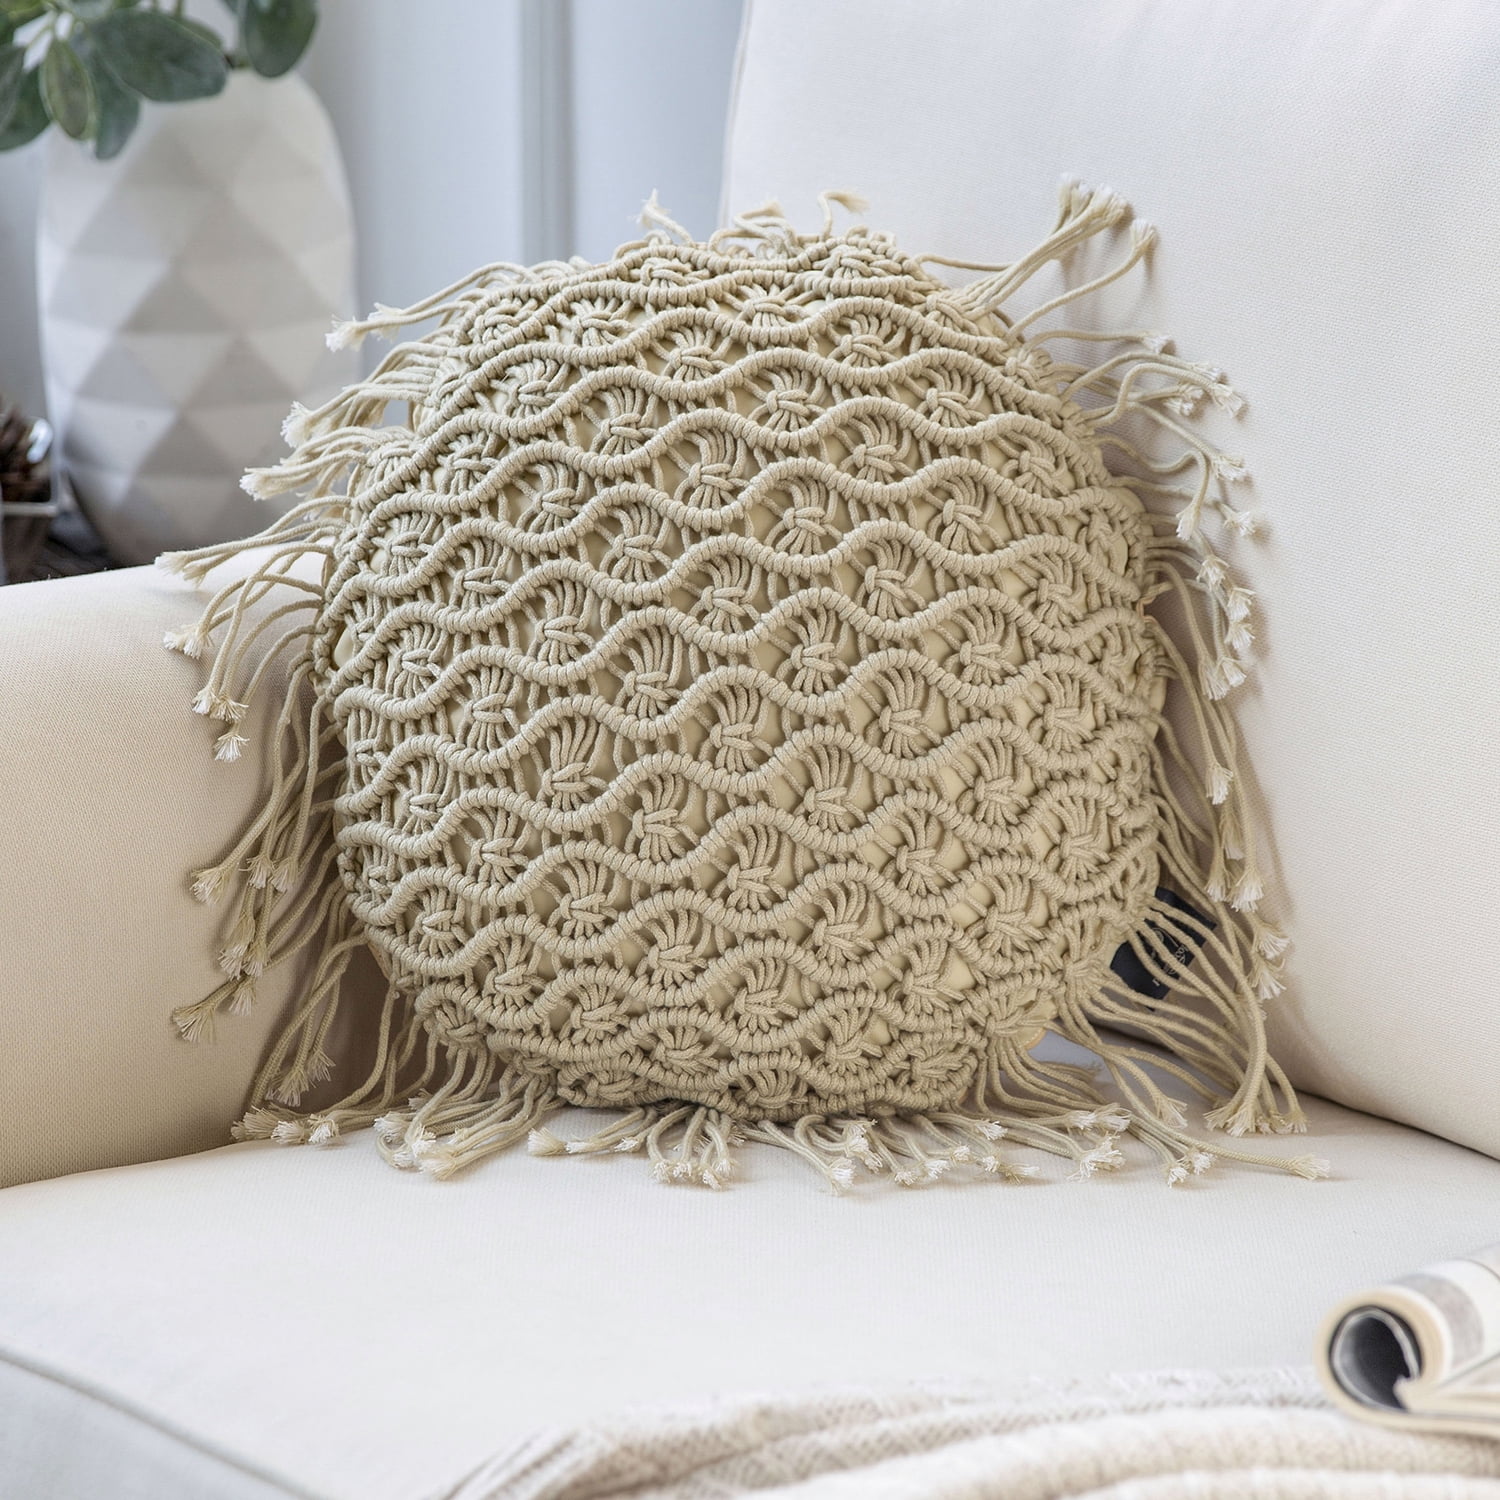 Phantoscope 100% Cotton Handmade Crochet Woven Boho with Tassels Series Decorative Throw Pillow, 16 inch x 16 inch Round, Off White, 1 Pack